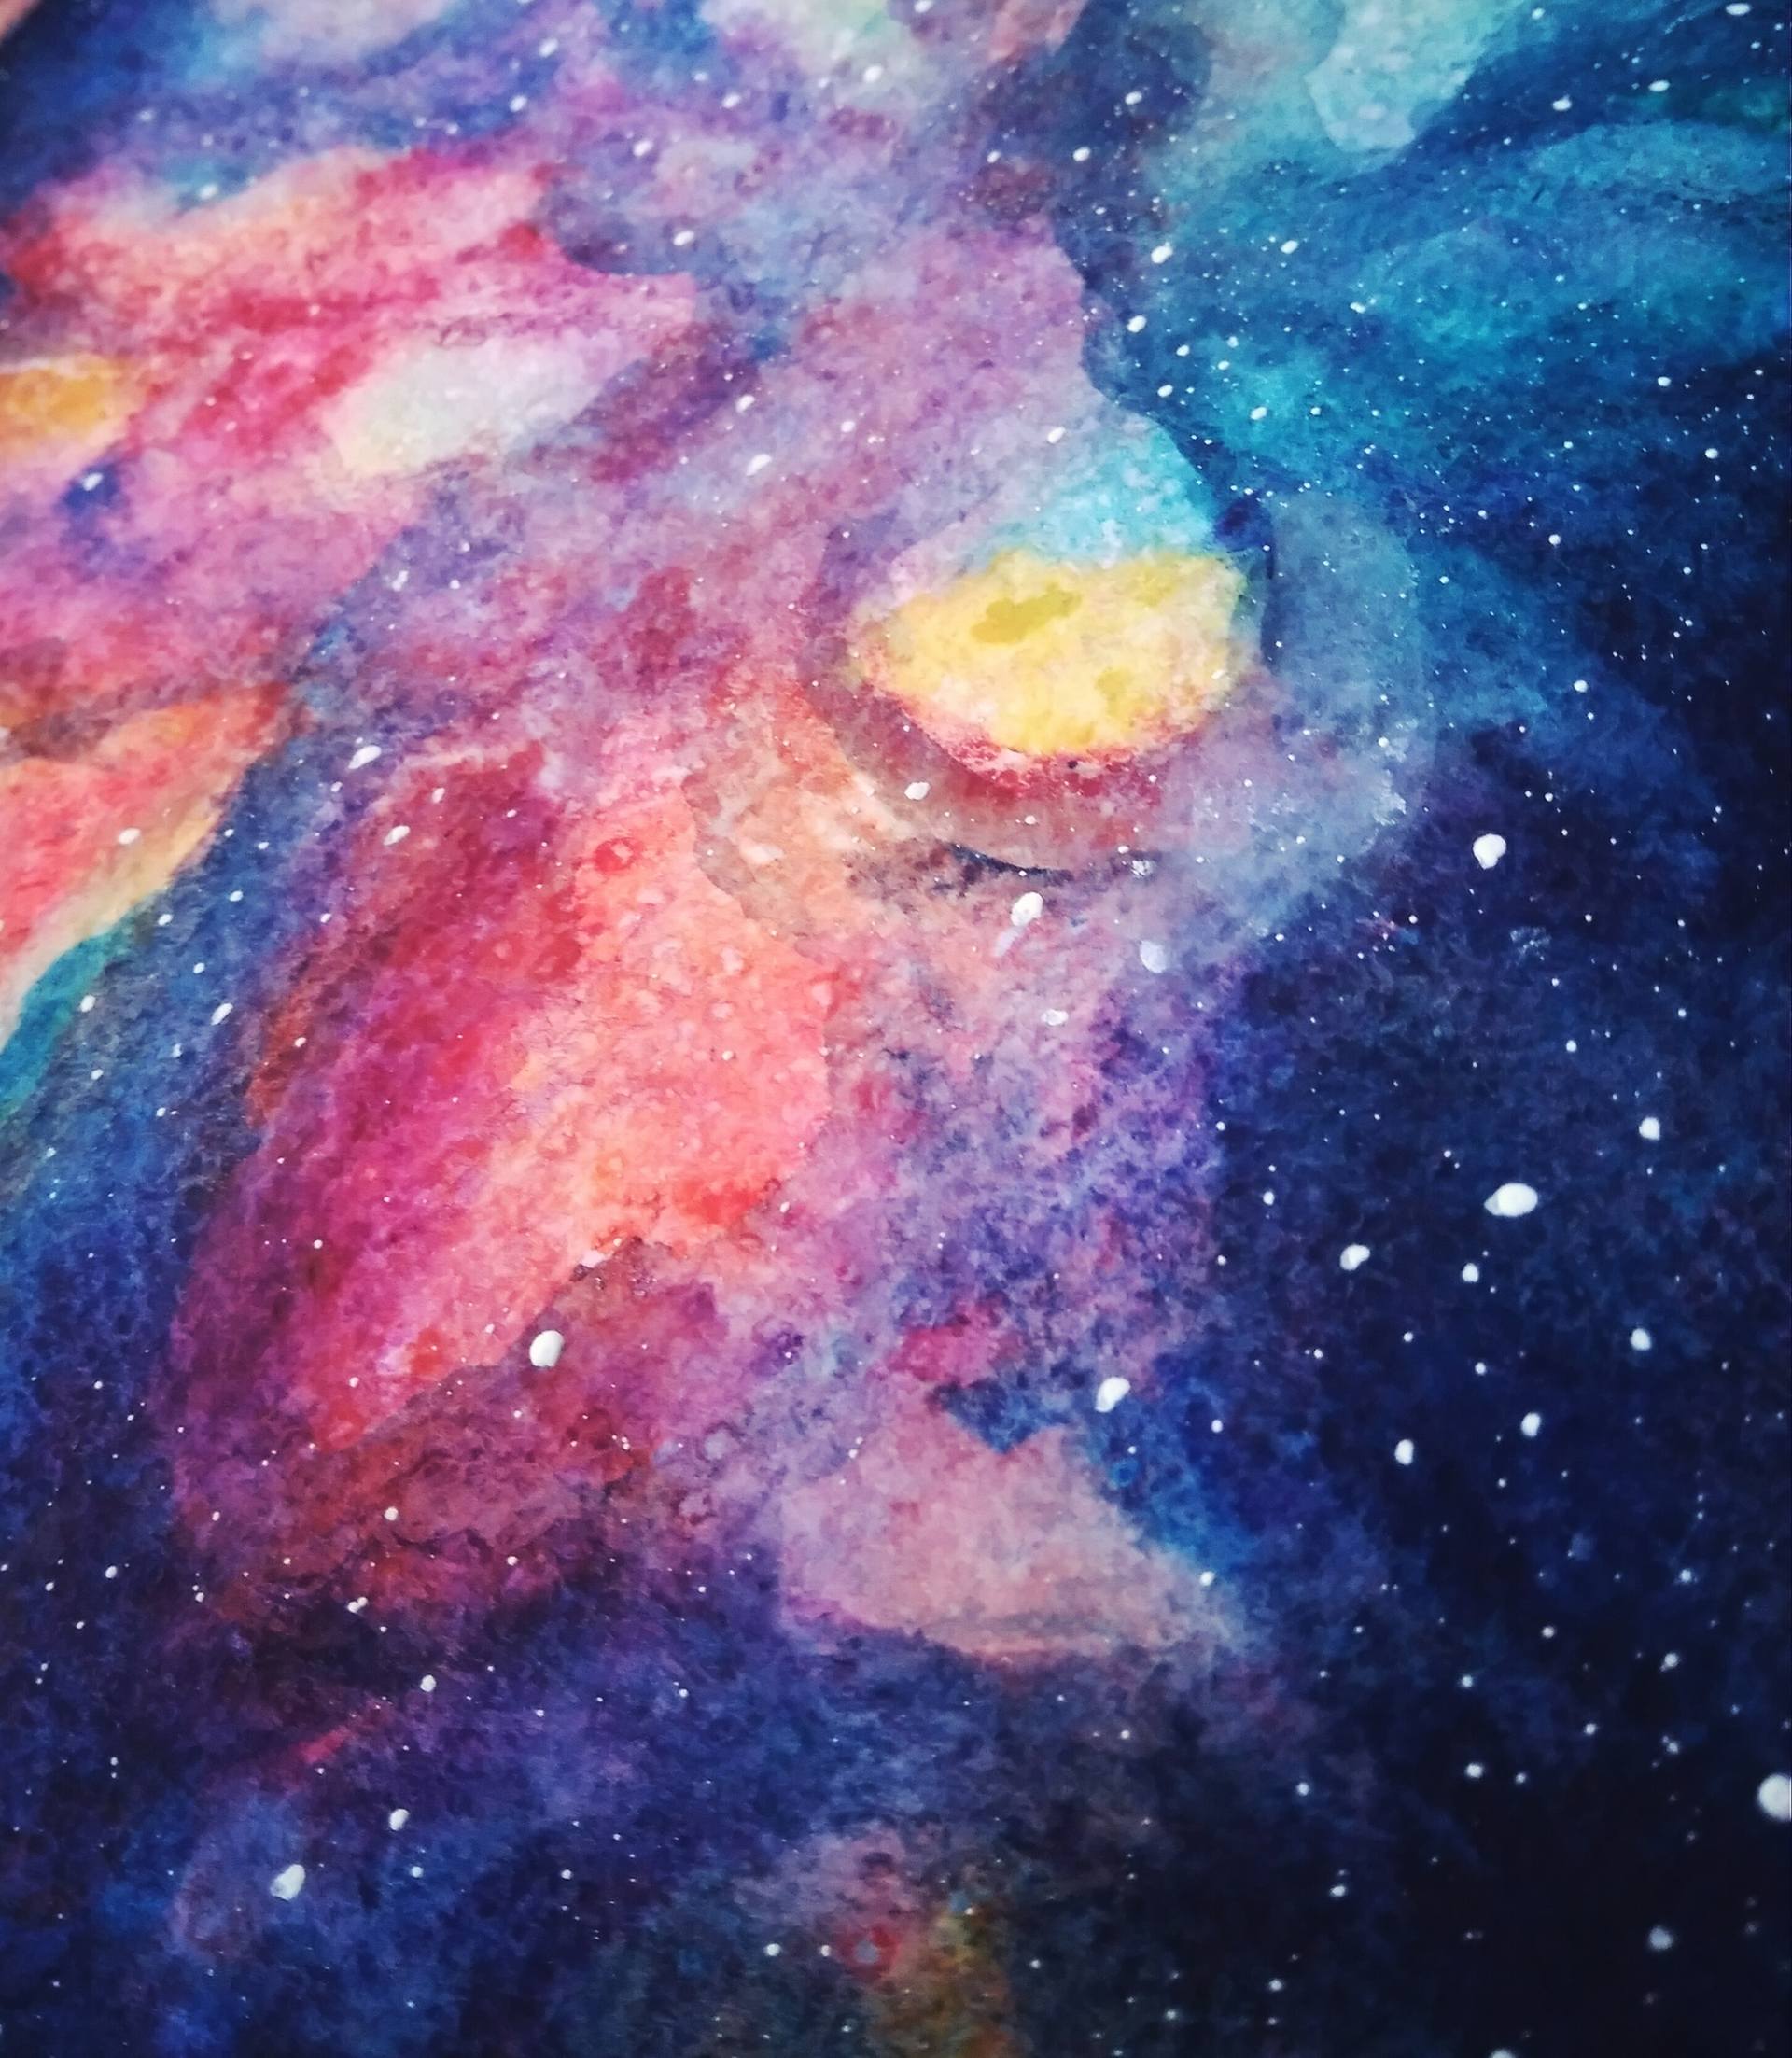 How To Draw A Nebula With Colored Pencils / On a piece of regular paper